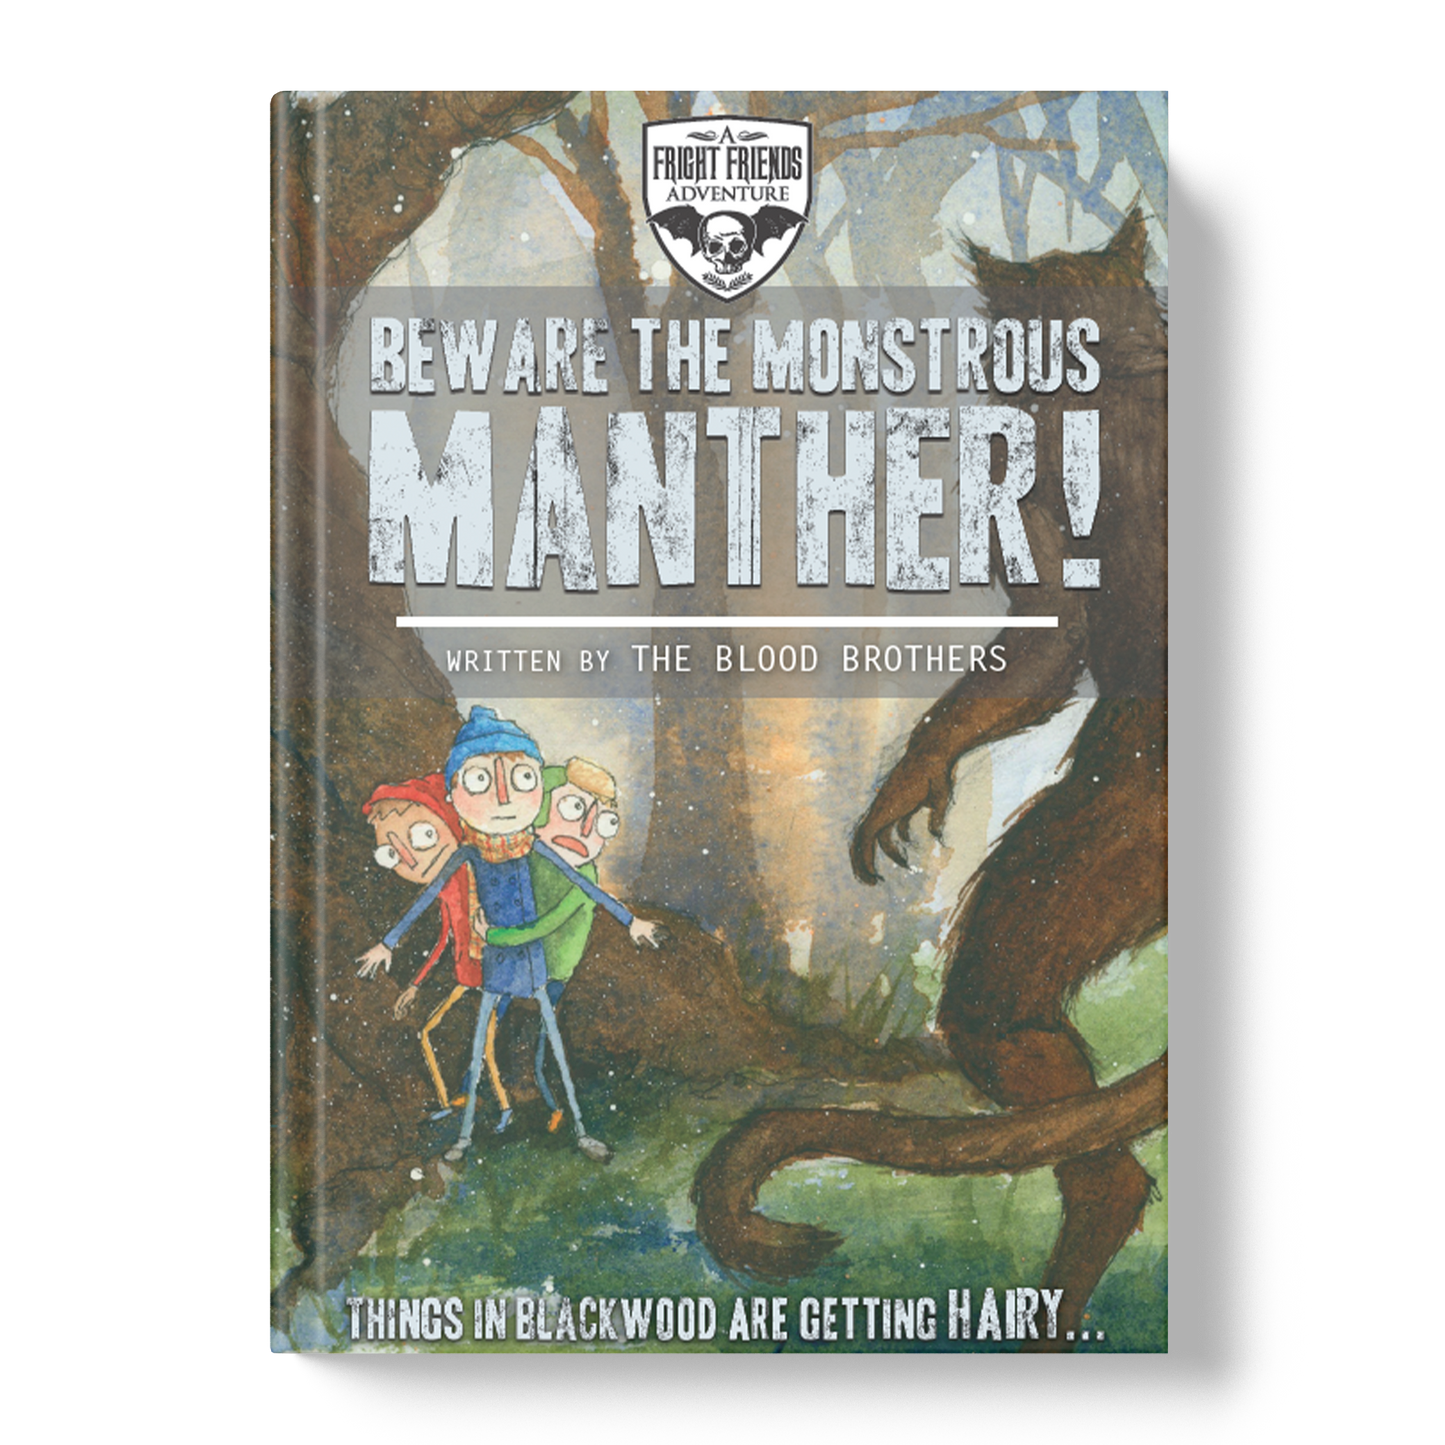 Beware the Monstrous Manther!